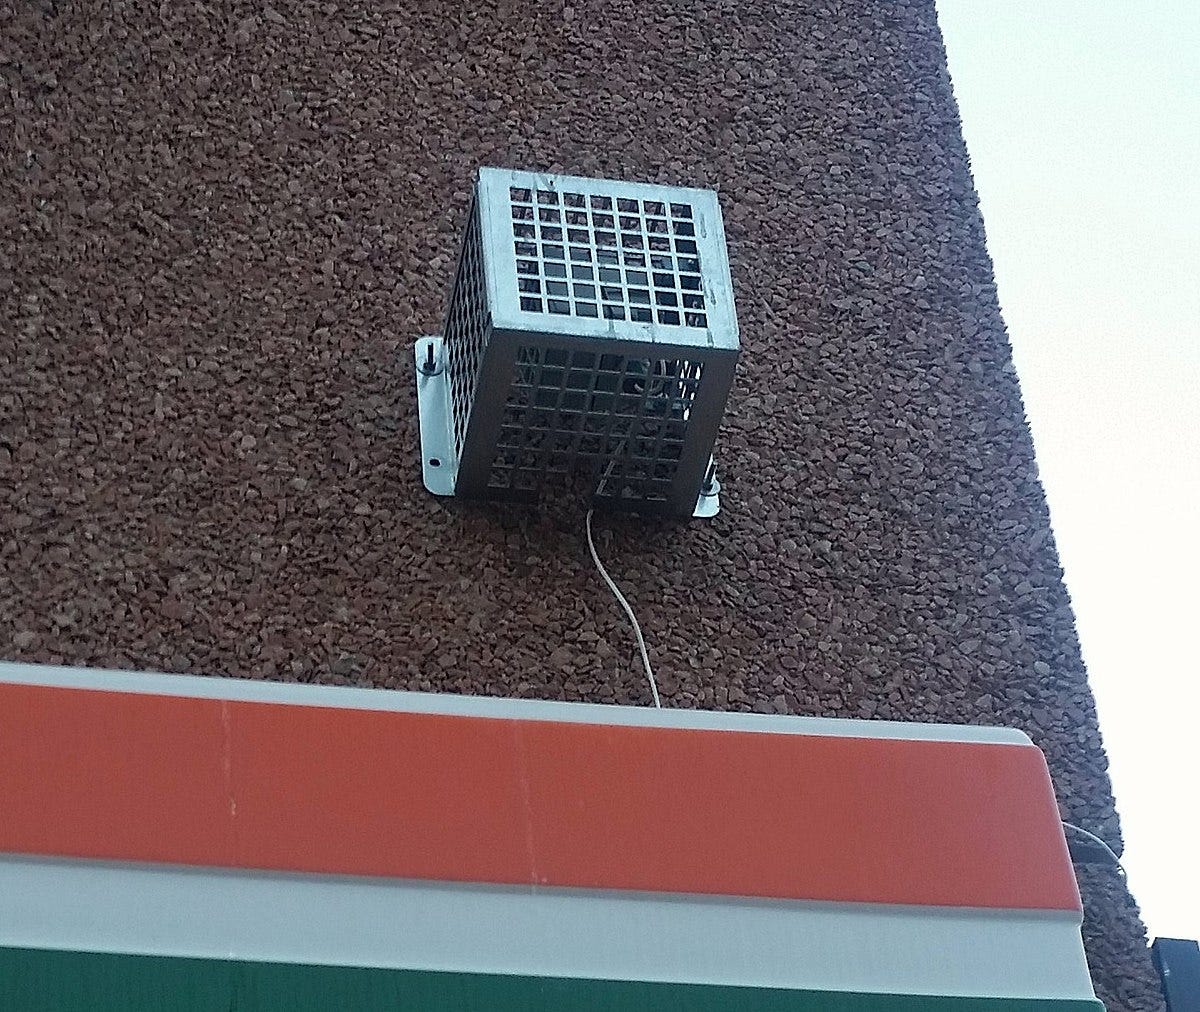 A Mosquito device mounted outside a store in Philadelphia